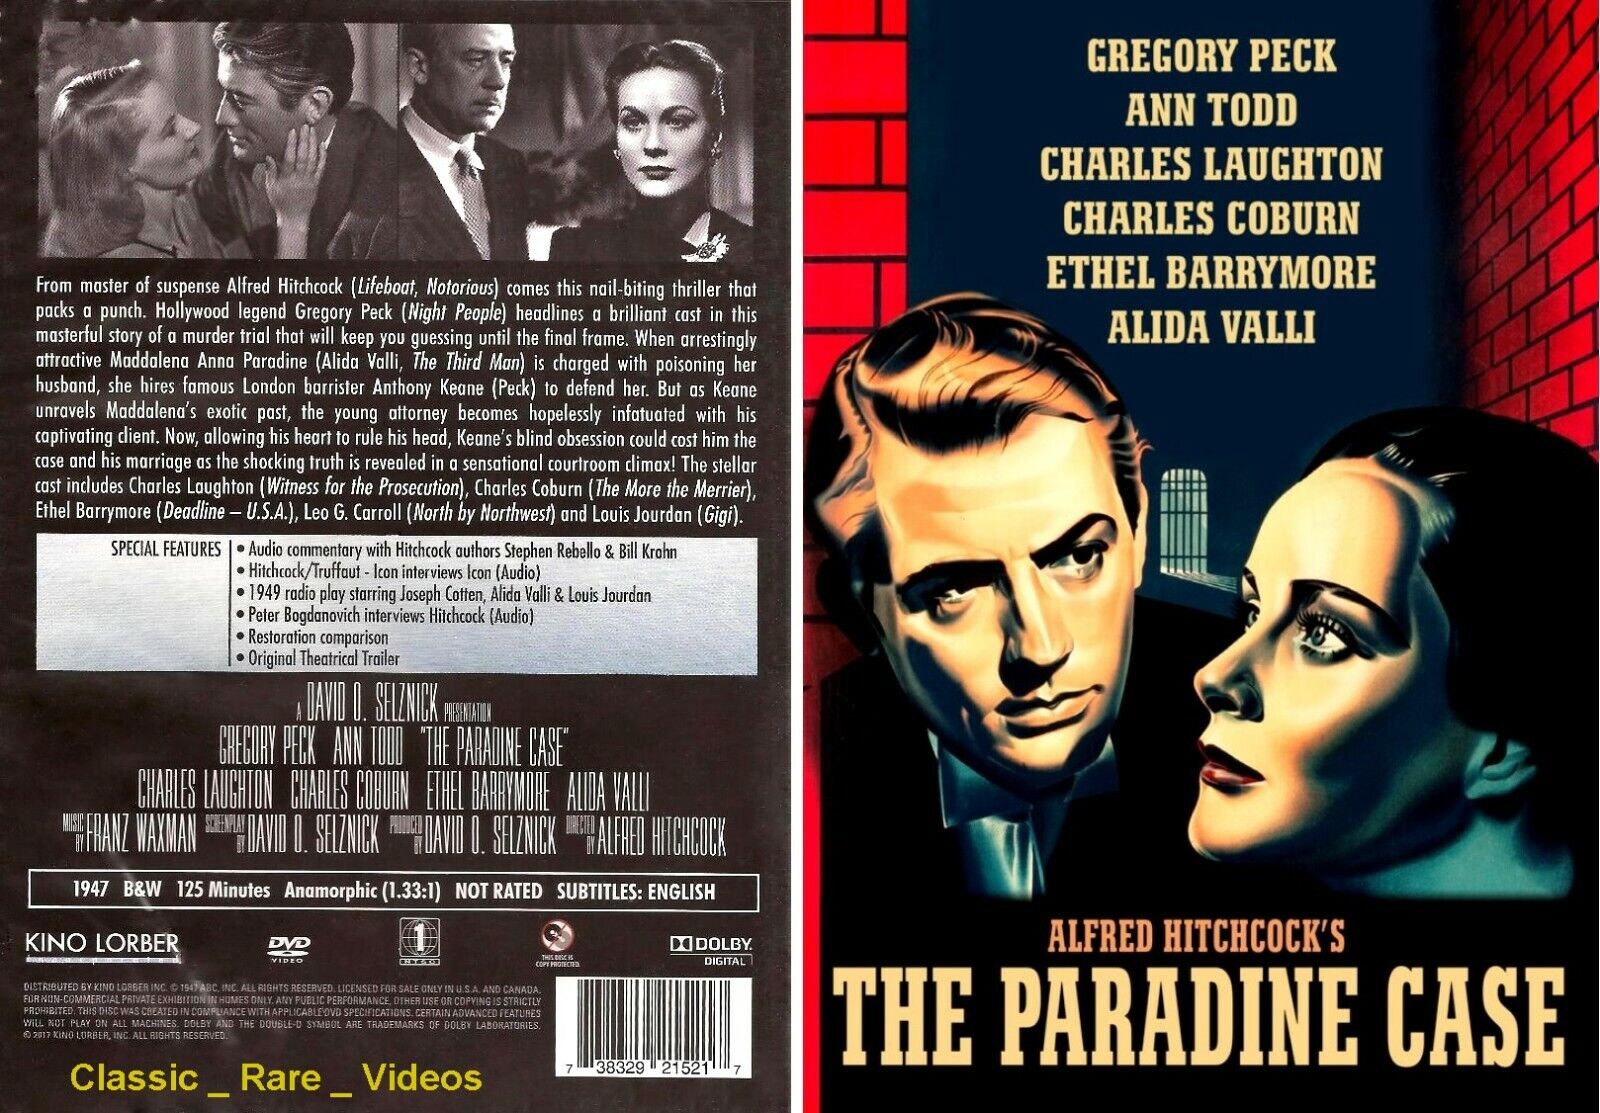 The paradine case 1947 Alfred Hitchcock